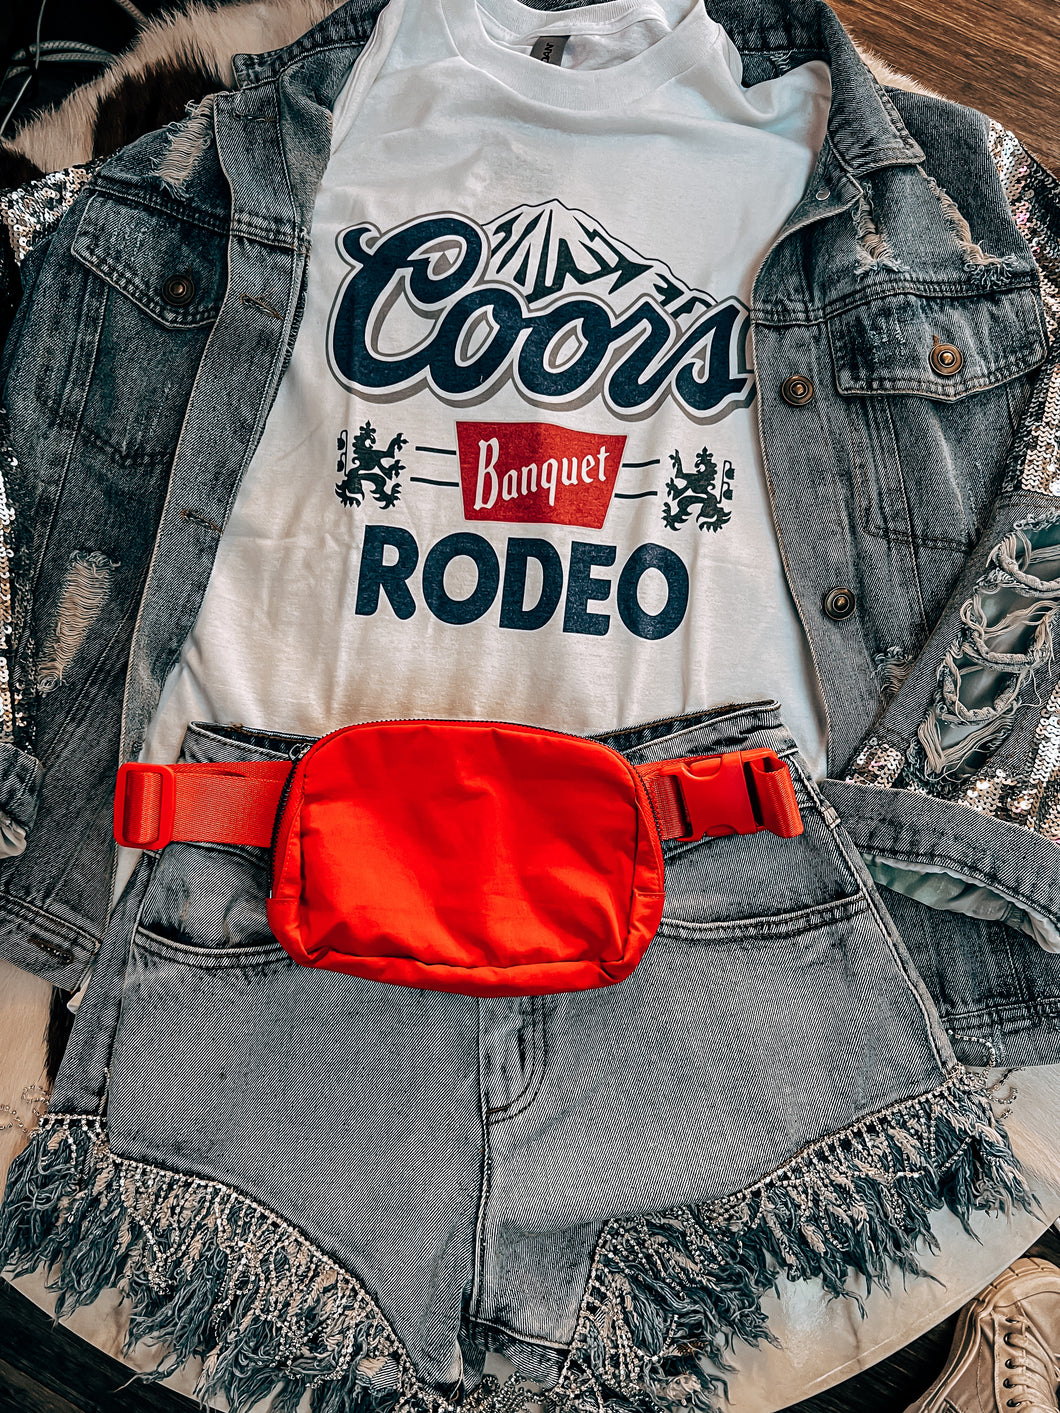 COORS Rodeo Graphic Tee